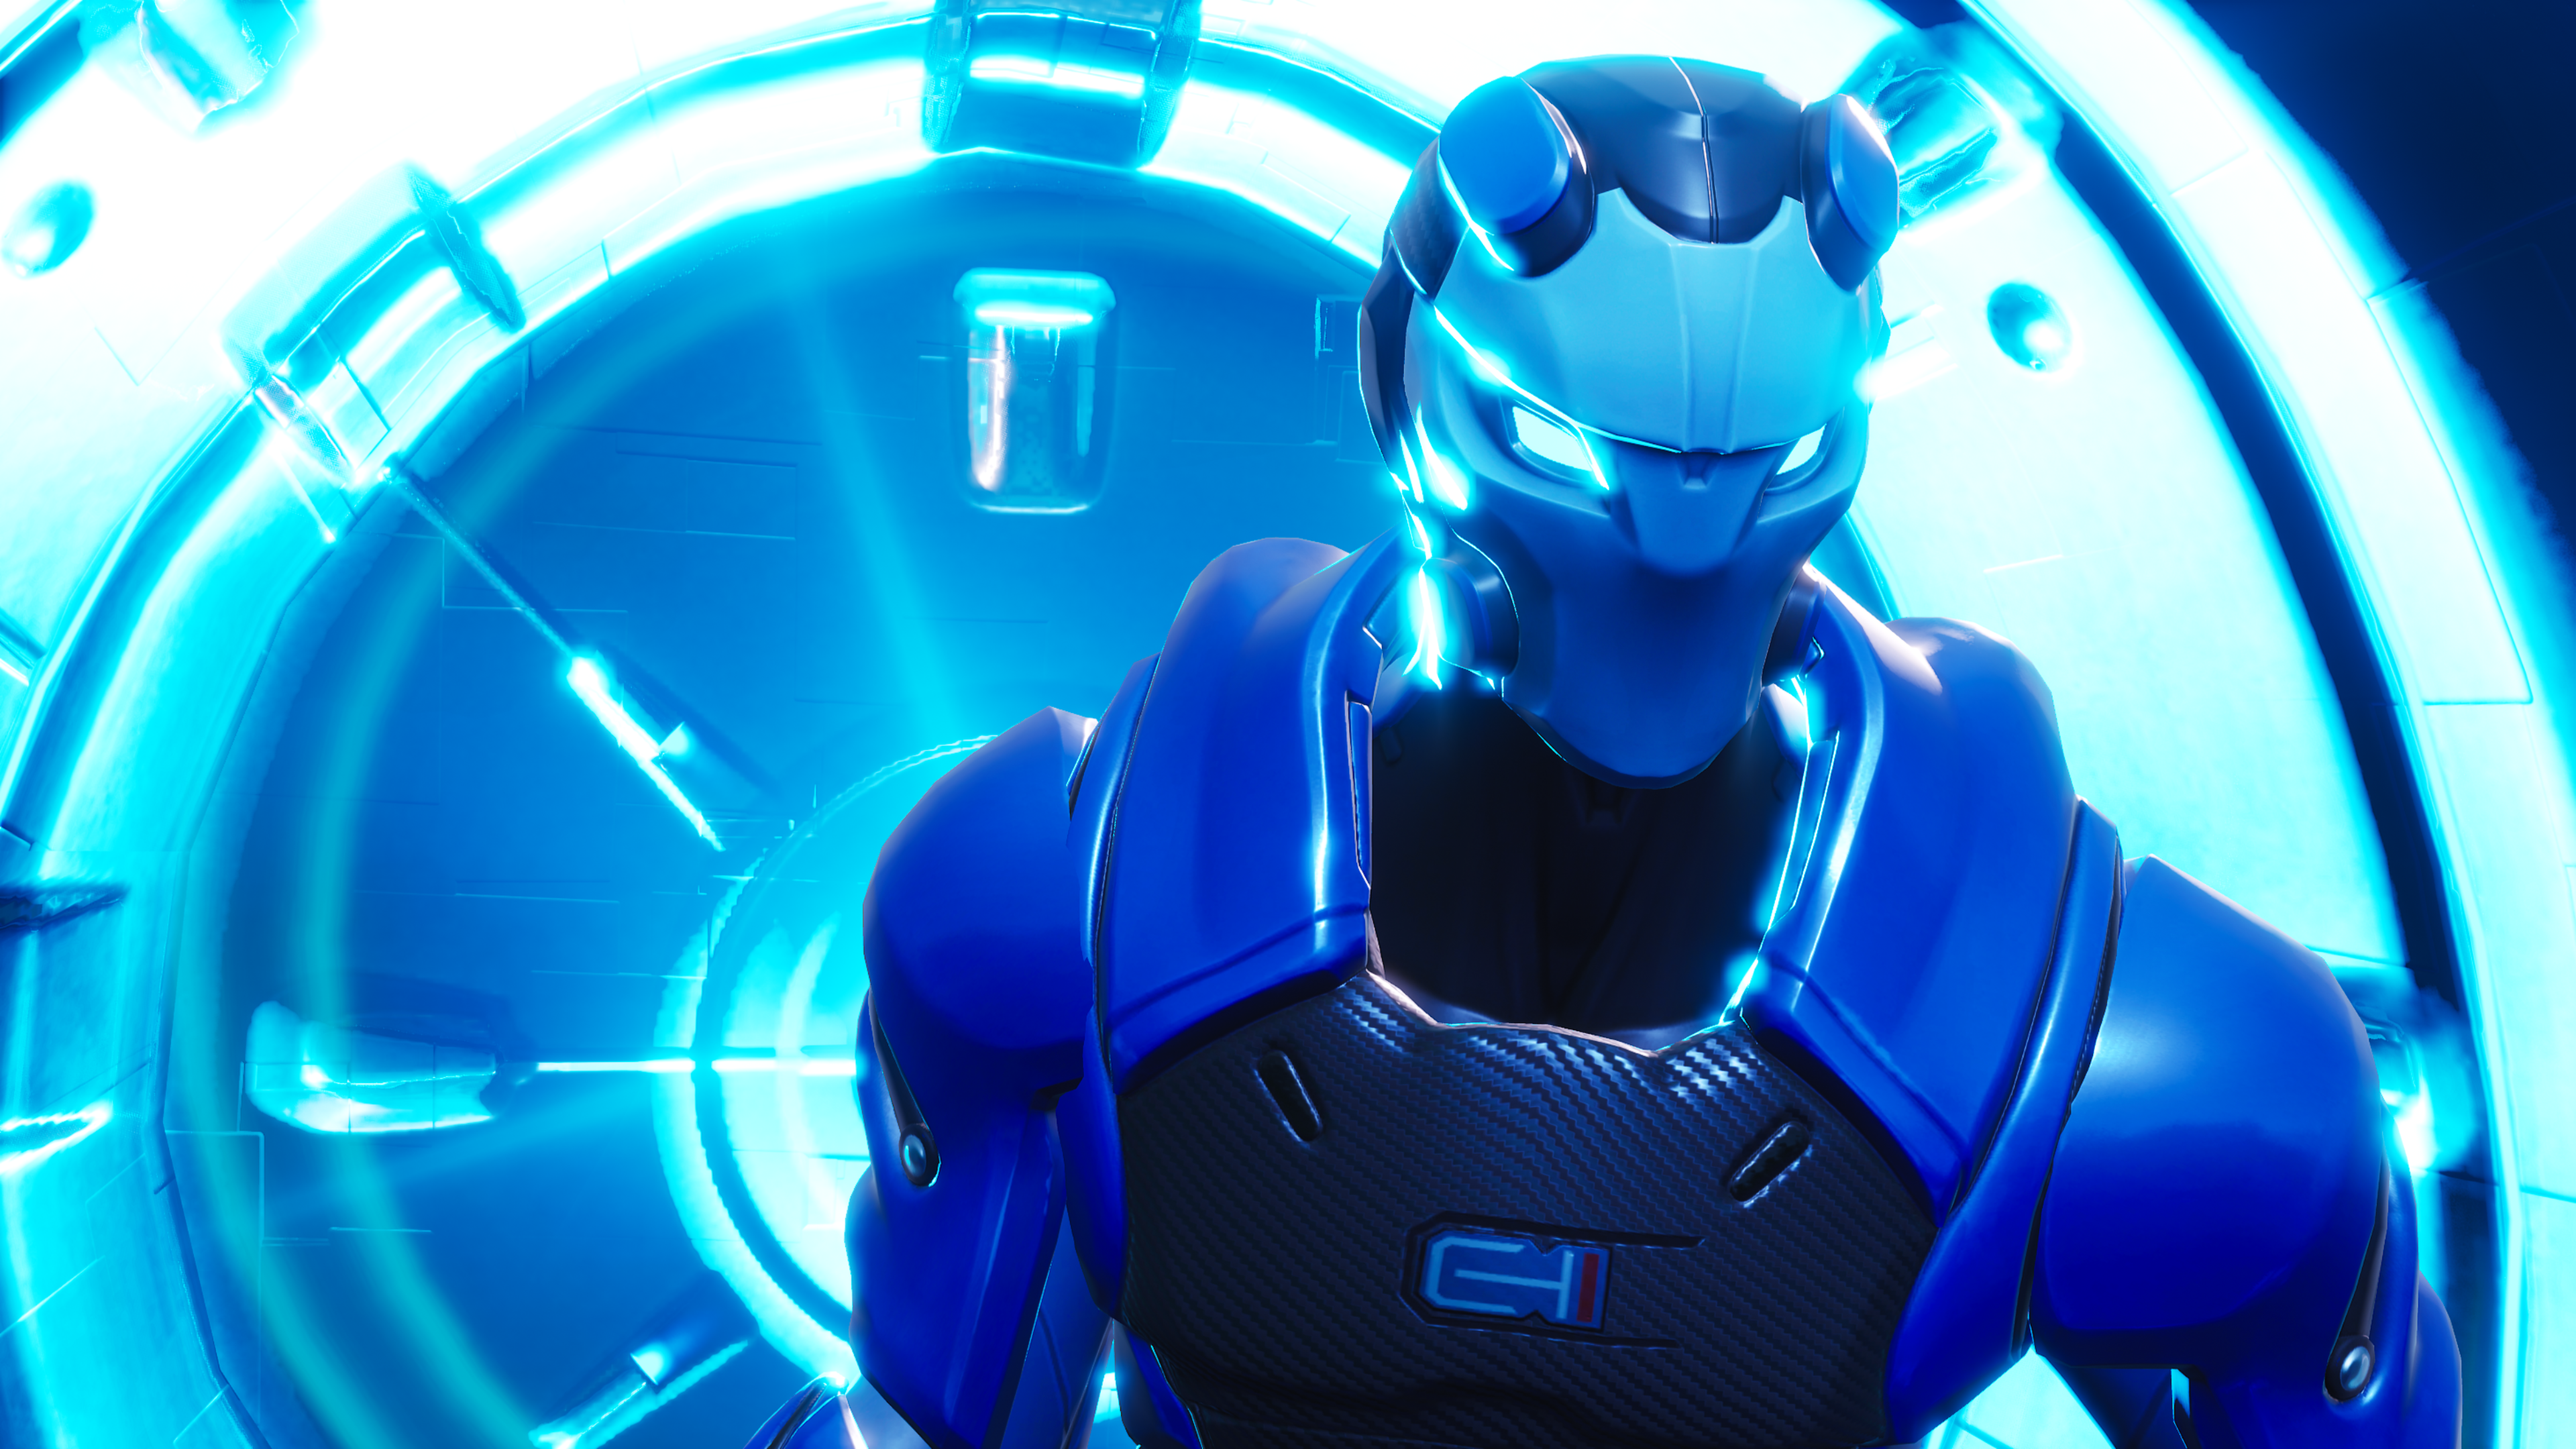 carbide fortnite wallpapers wallpaper cave on carbide fortnite wallpapers